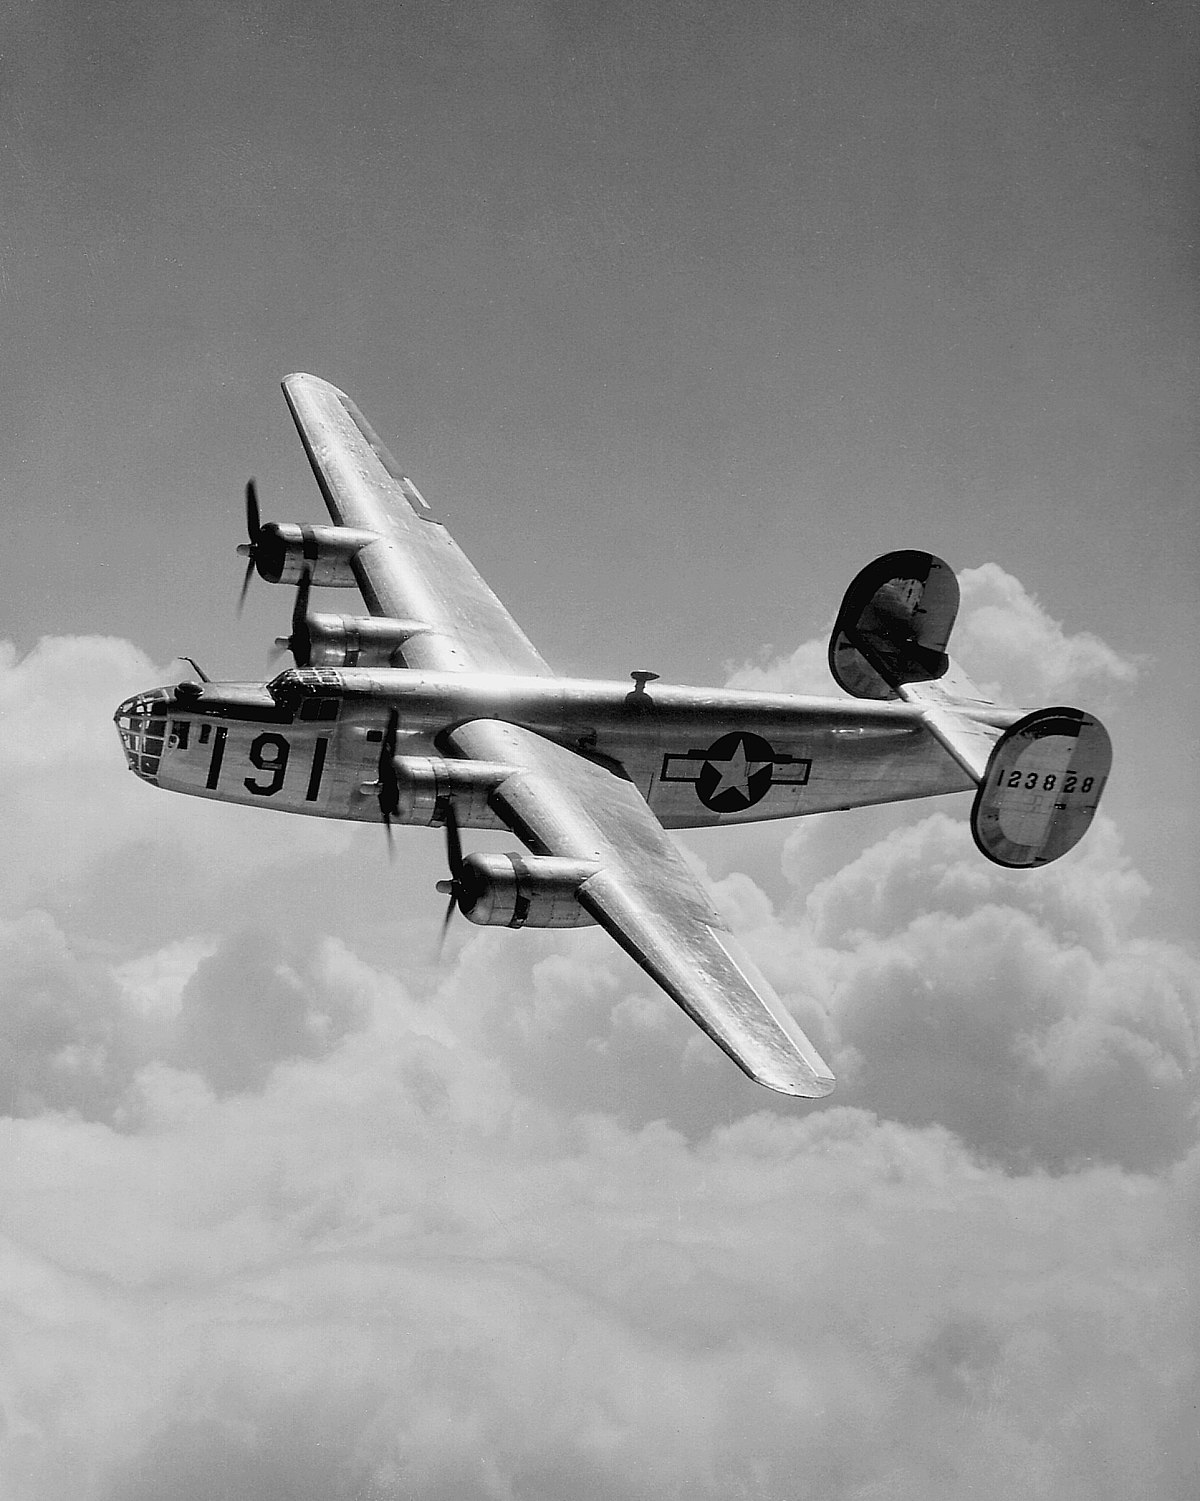 A Consolidated B-24 Liberator from Maxwell Field, Alabama, four engine pilot school, glistens in the sun as it makes a turn at high altitude in the clouds. Heavy Bombers